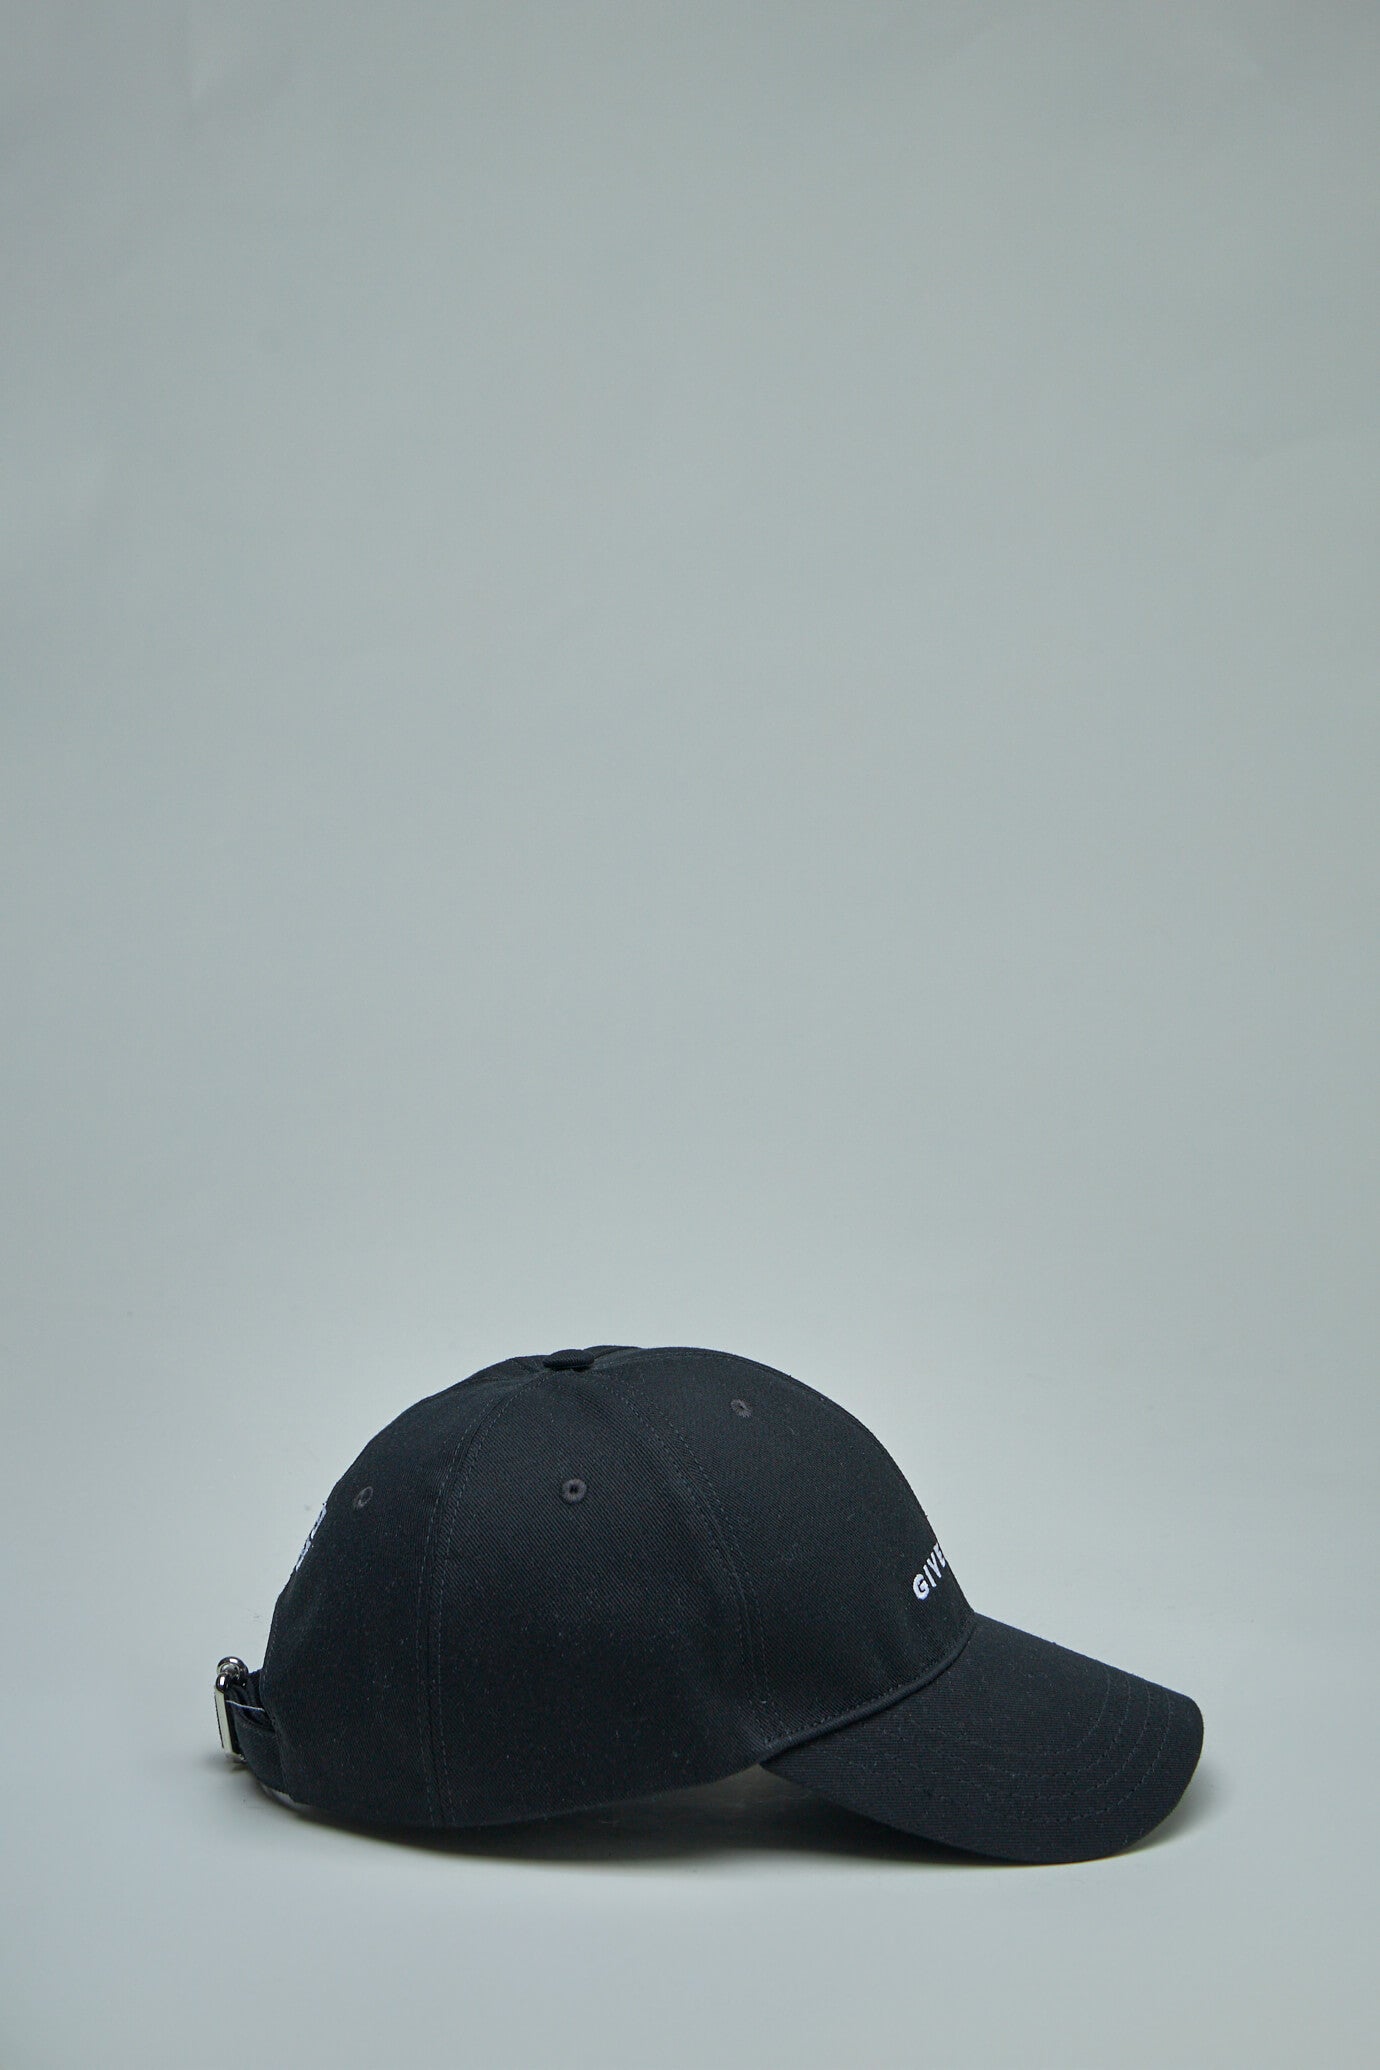 Givenchy Curved Cap W/ Logo black – LABELS